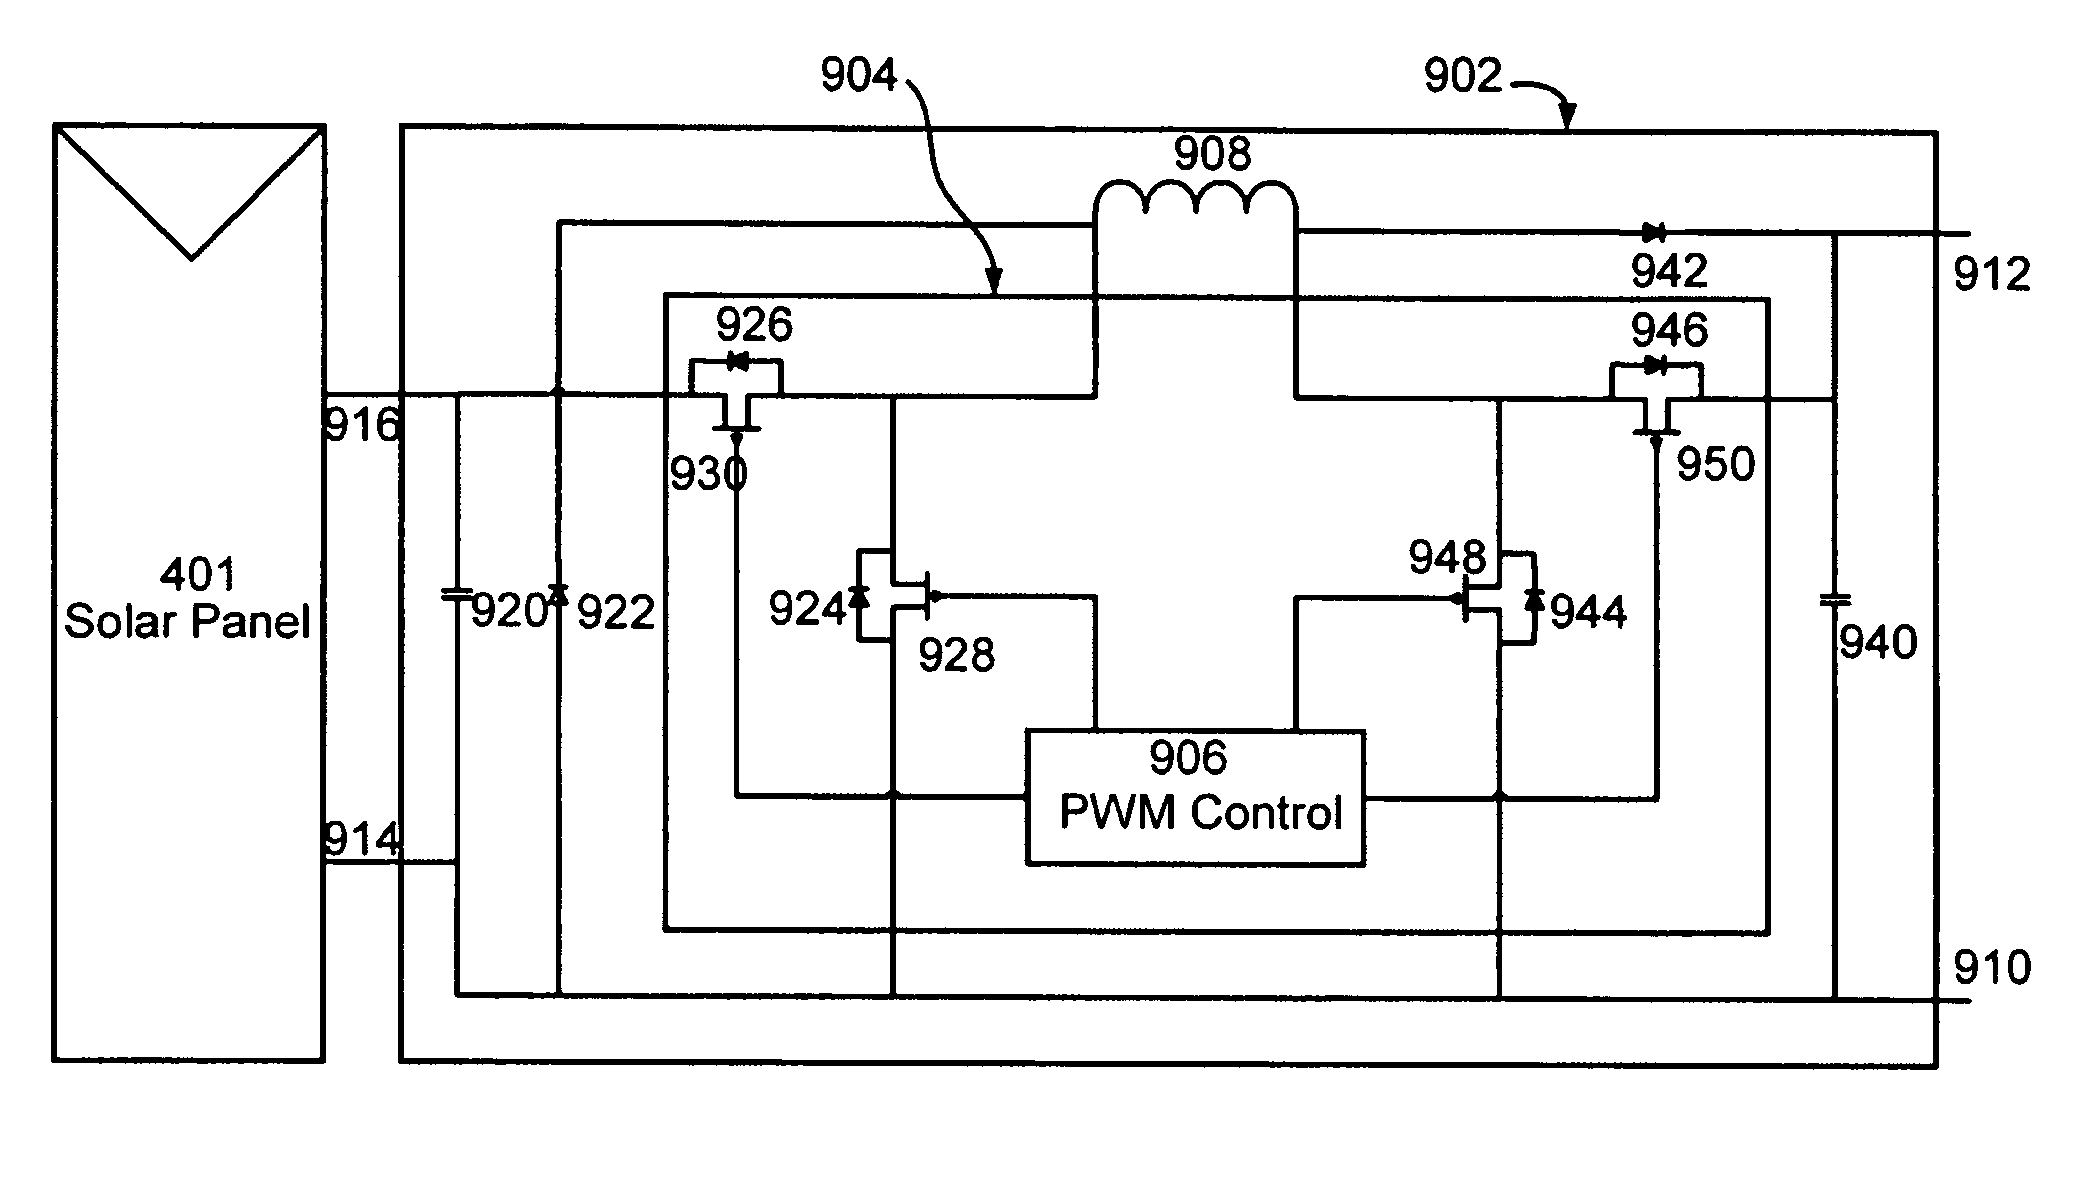 Current bypass for distributed power harvesting systems using DC power sources